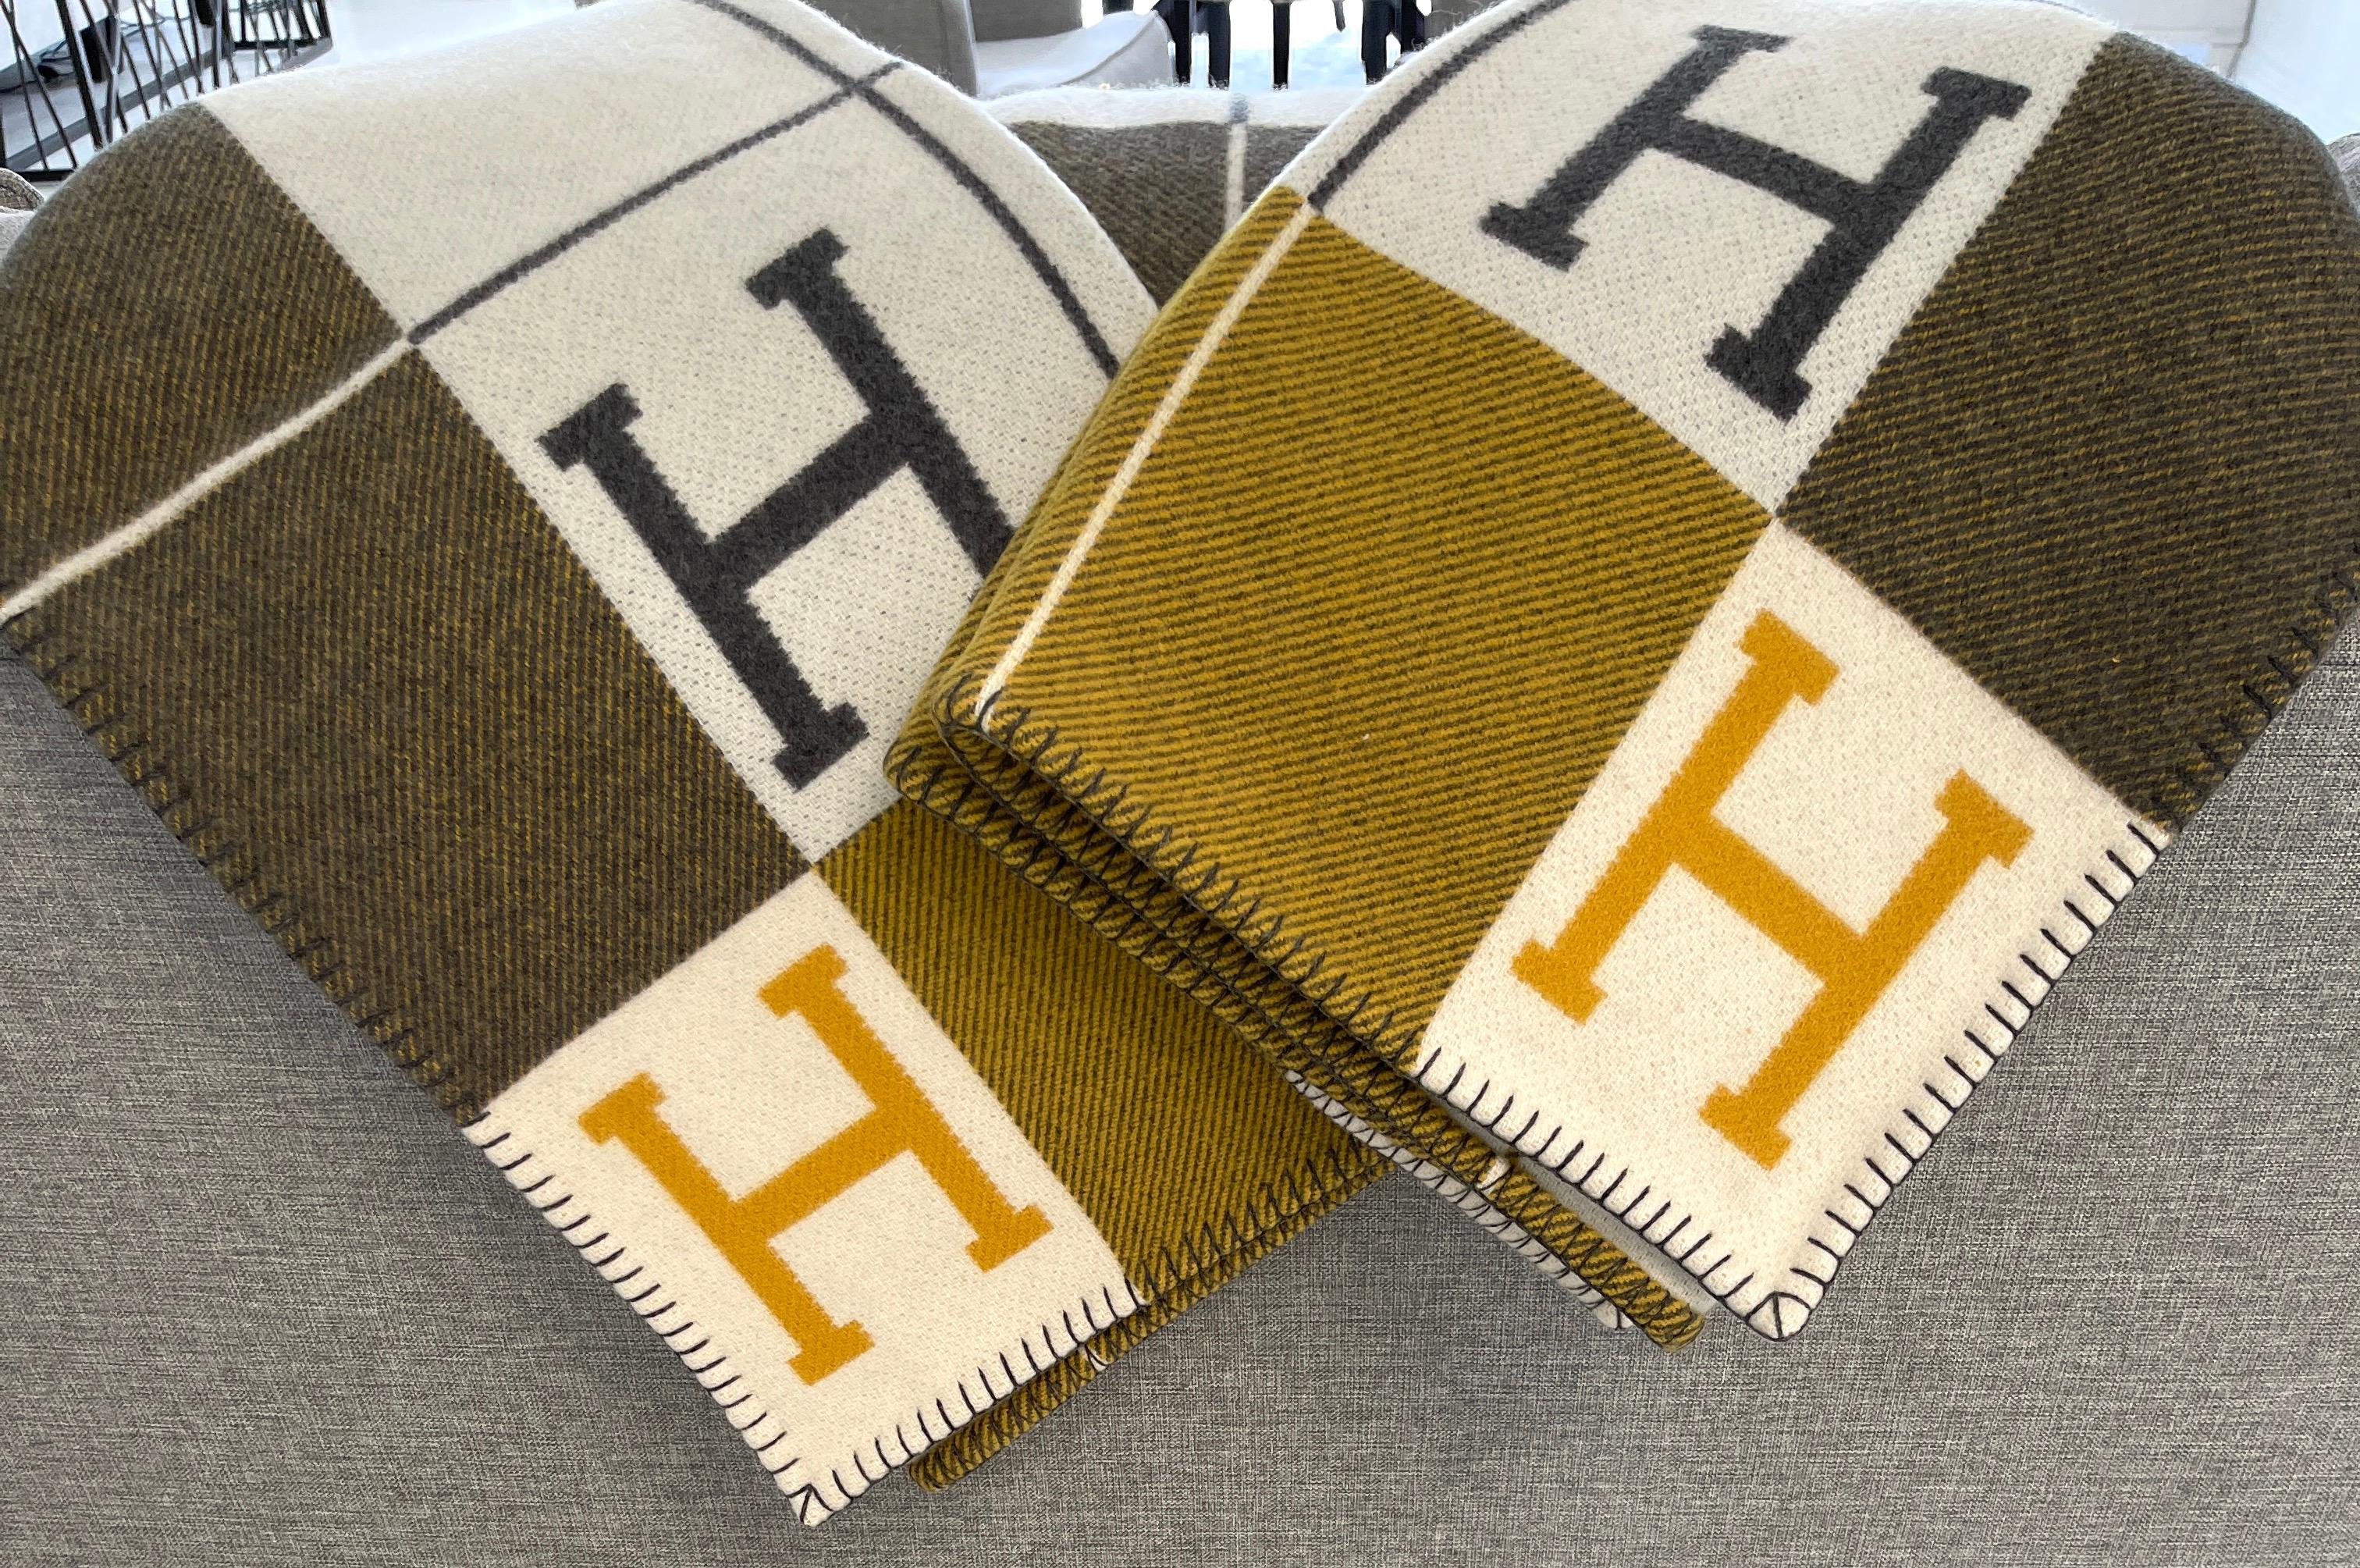 Hermes Avalon III Blanket
Gris and Soleil
New color combination
Grey and Yellow

Brand New
Taken out for photos only
Hermes throw blanket (90% merino wool, 10% cashmere)
Measures 53